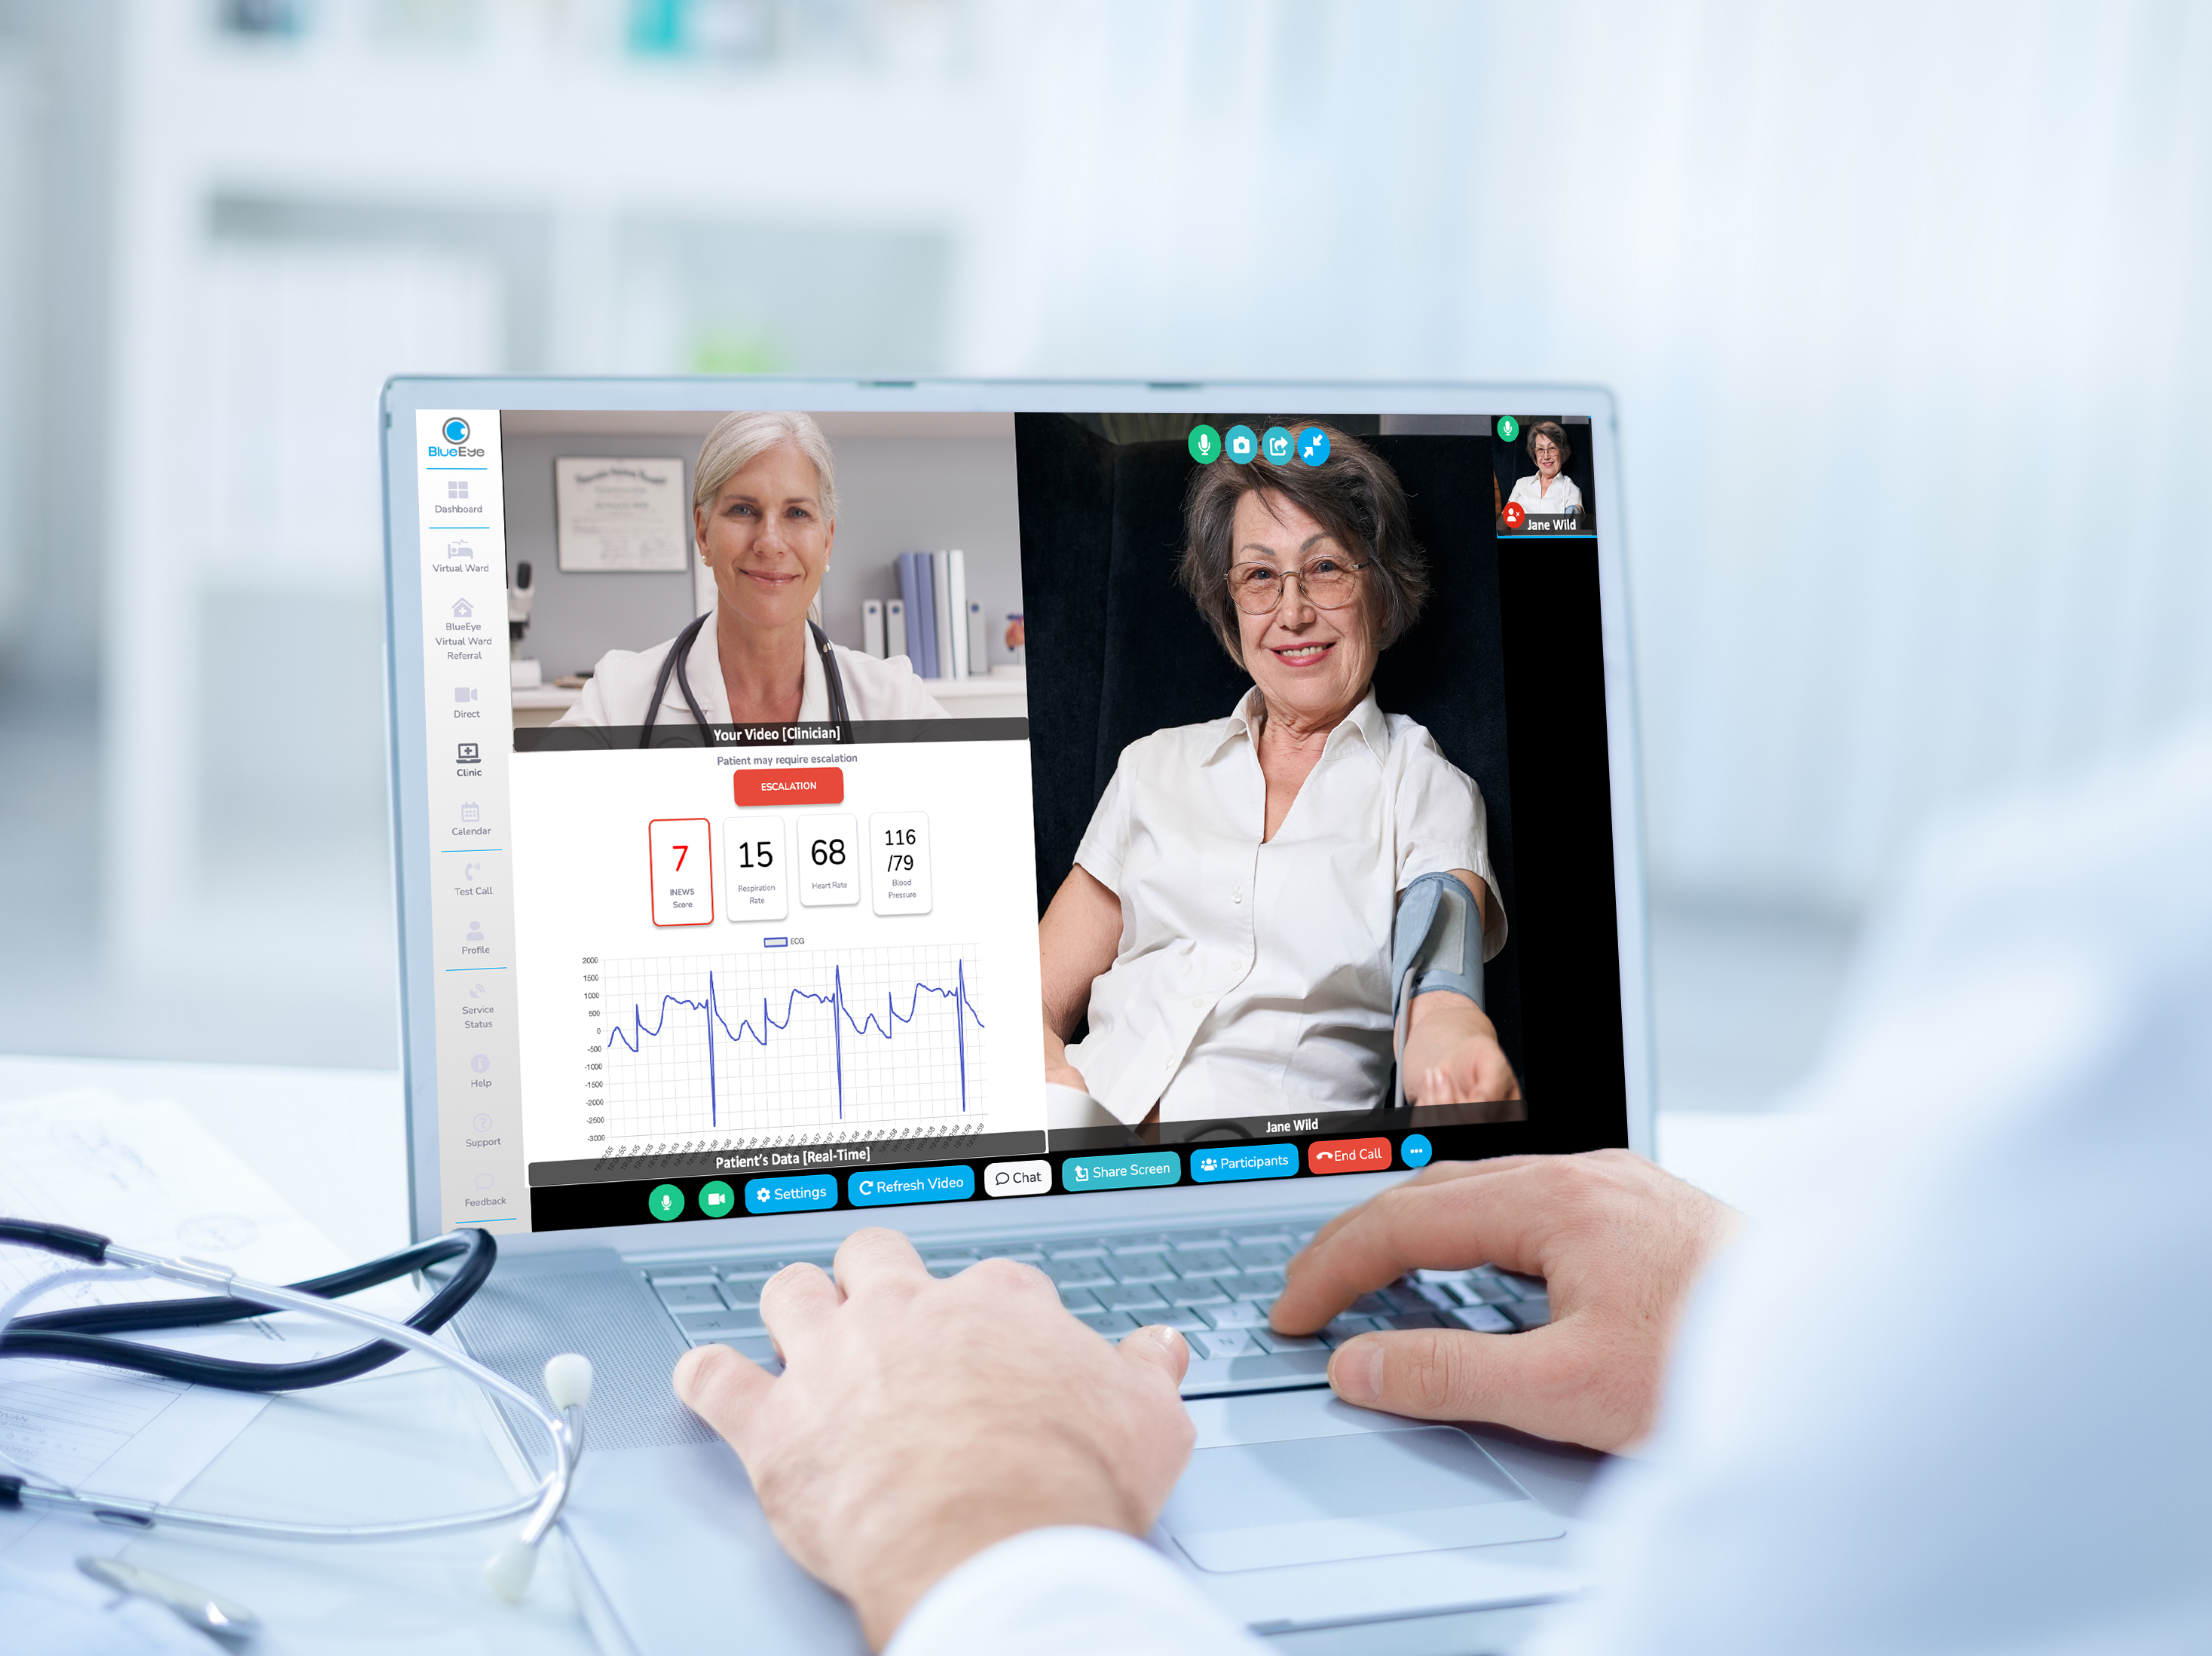 A healthcare professional engaged in a virtual ward with a patient with live patient video and patient vitals on screen